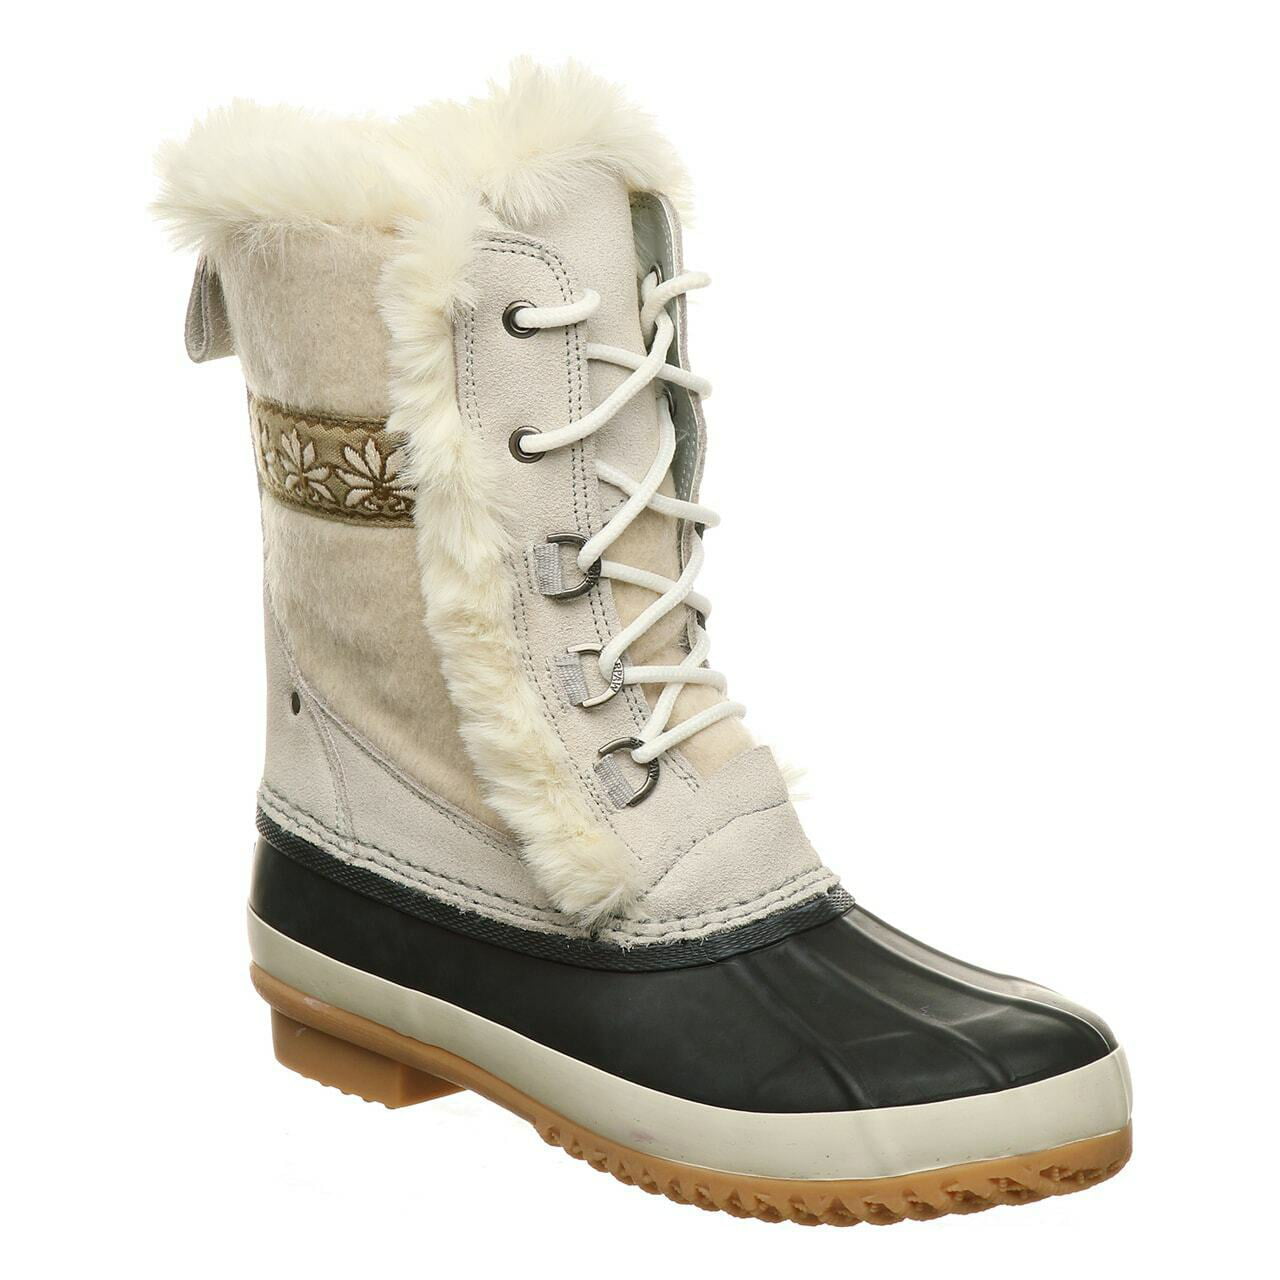 Ladies Thermal Touch Close Ankle Warm Winter Snow  Boots Size 3 4 5 6 7 8 